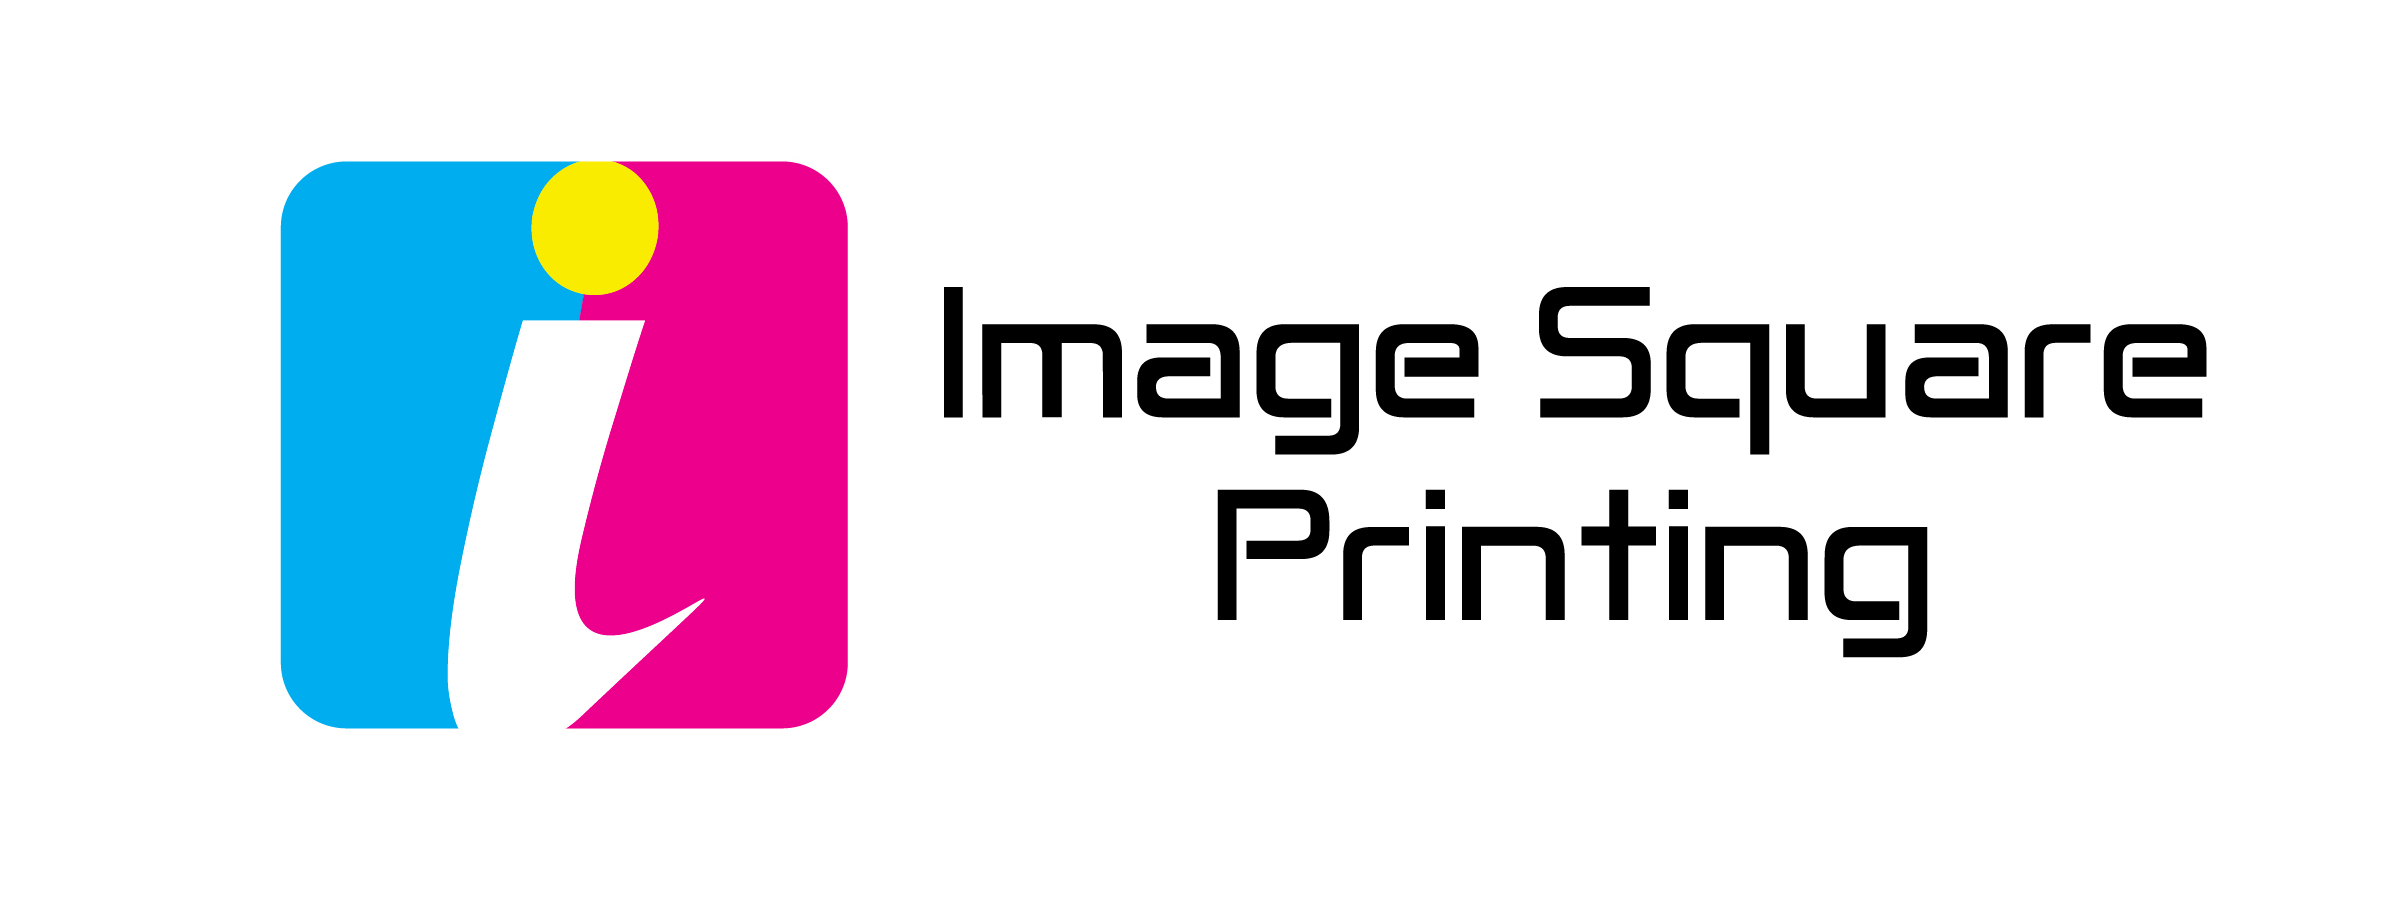 Image Square Printing Elevates Visual Communication with Cutting-Edge Large Format Printing Solutions